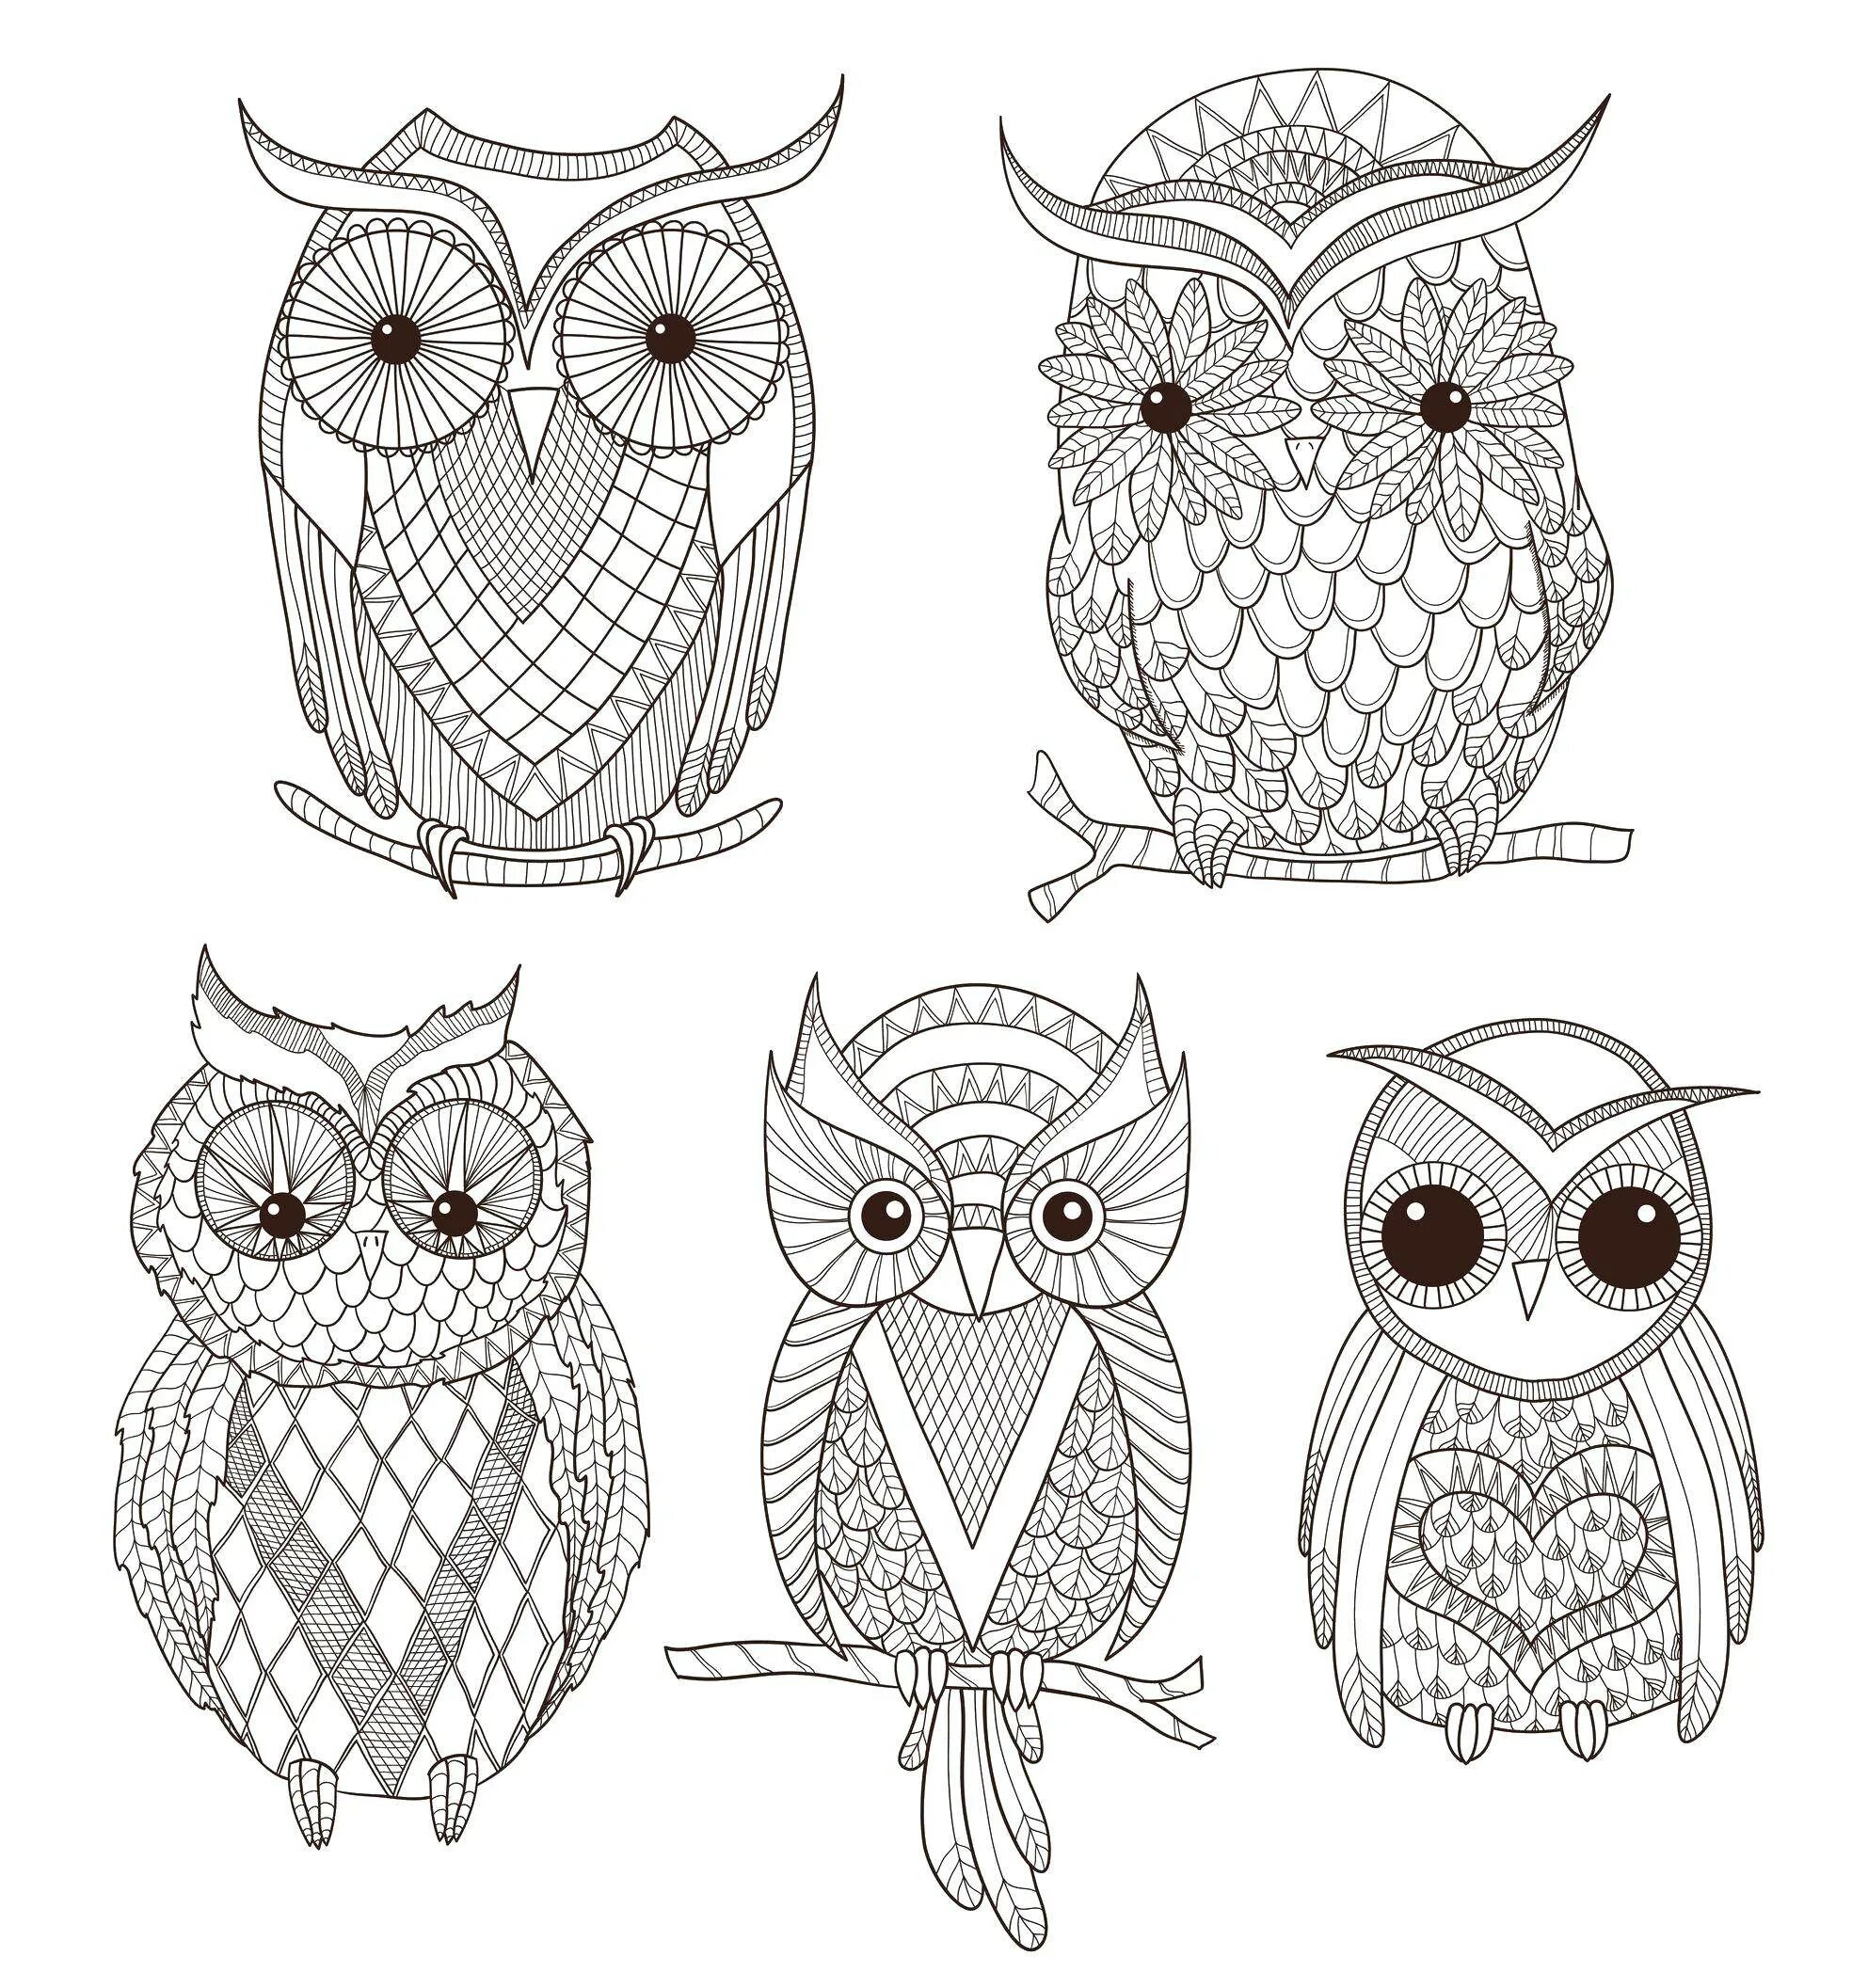 Coloring dreamy anti-stress owls